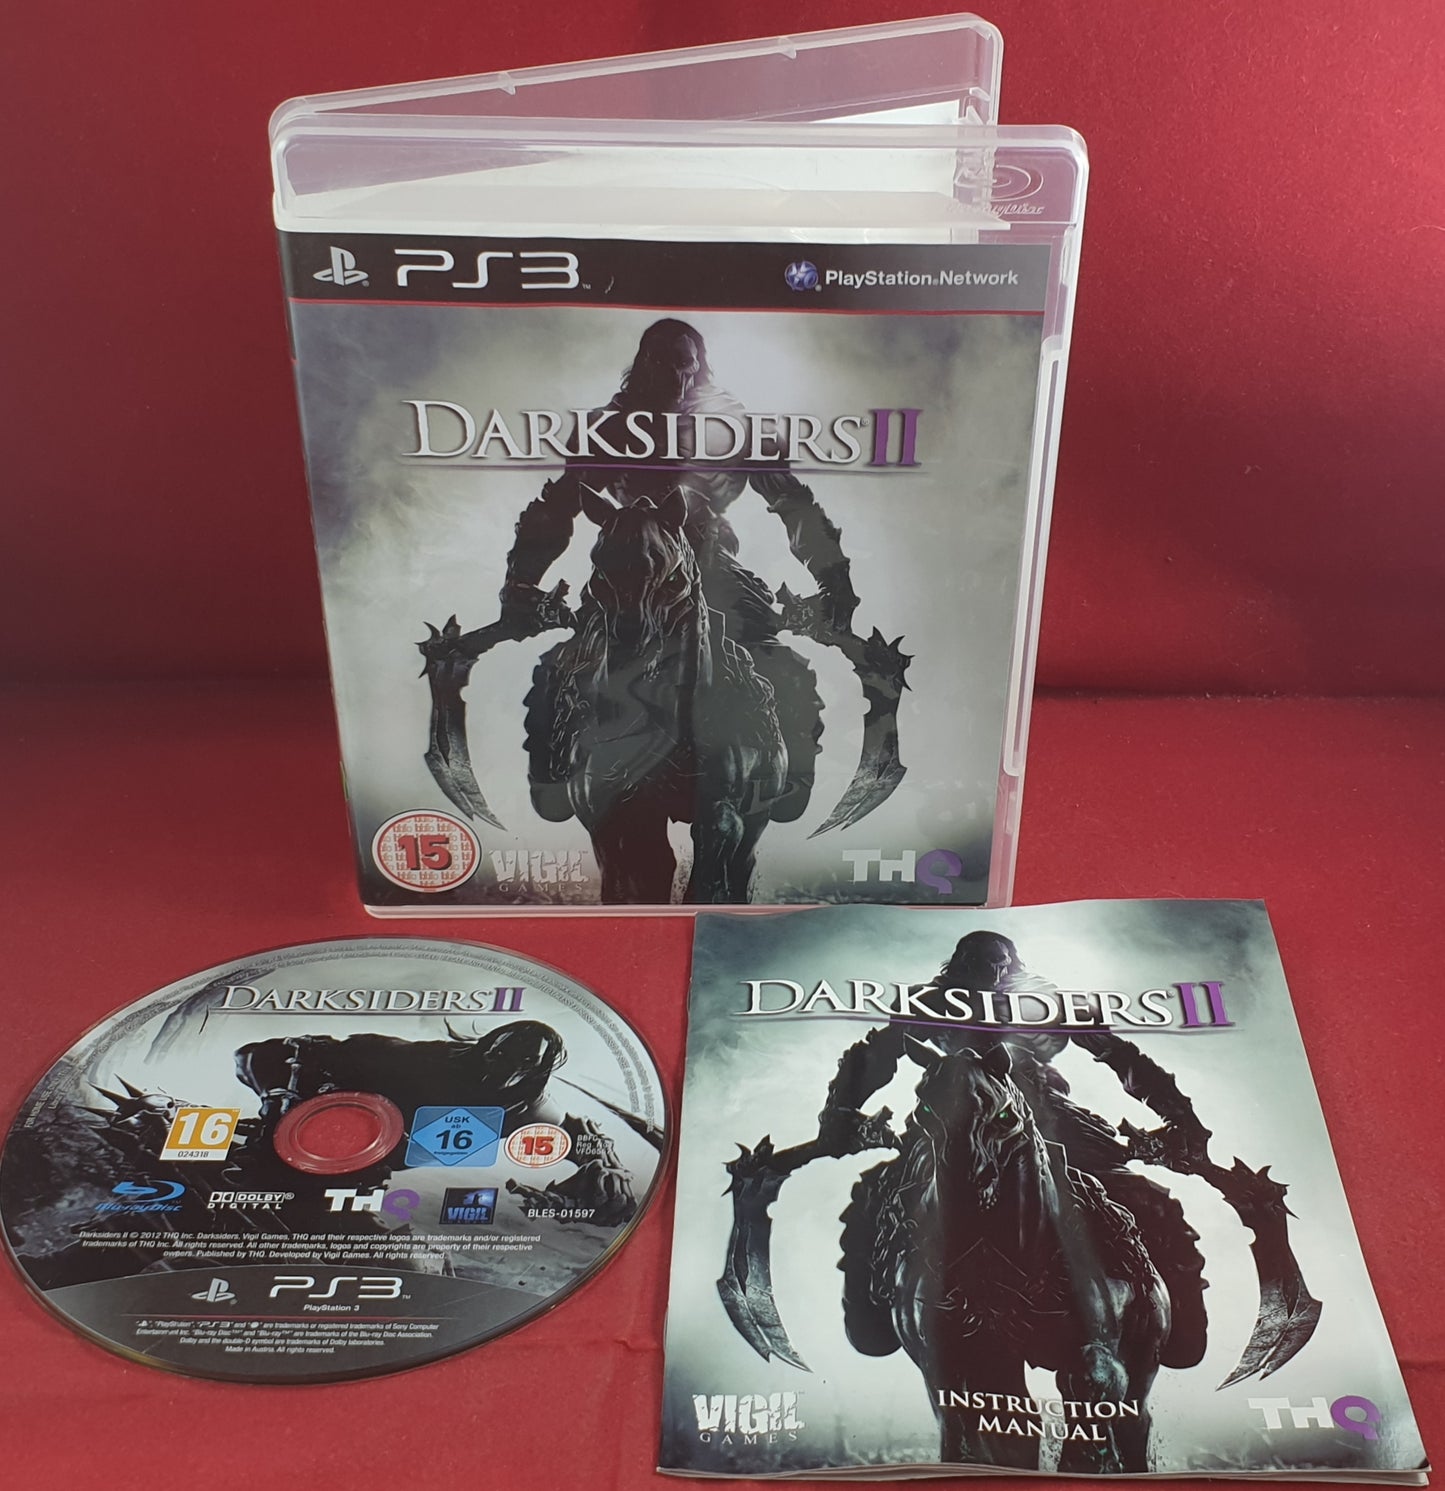 Darksiders II Sony Playstation 3 (PS3) Game